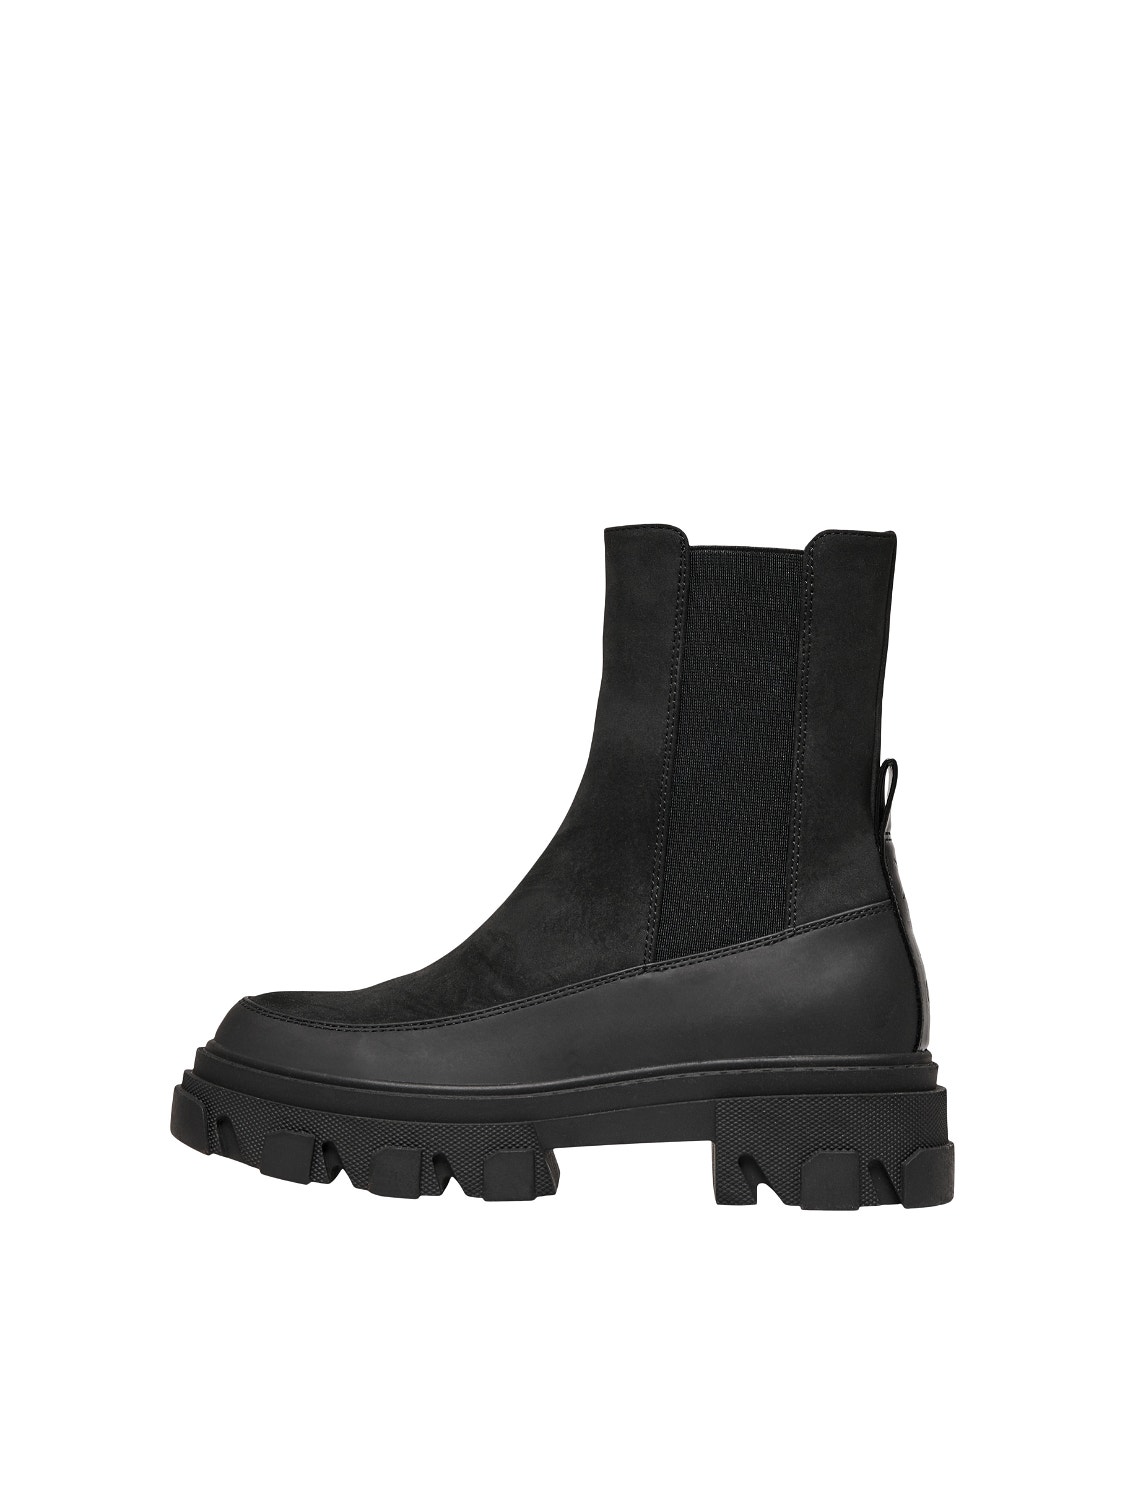 ONLY Boots -Black - 15238956